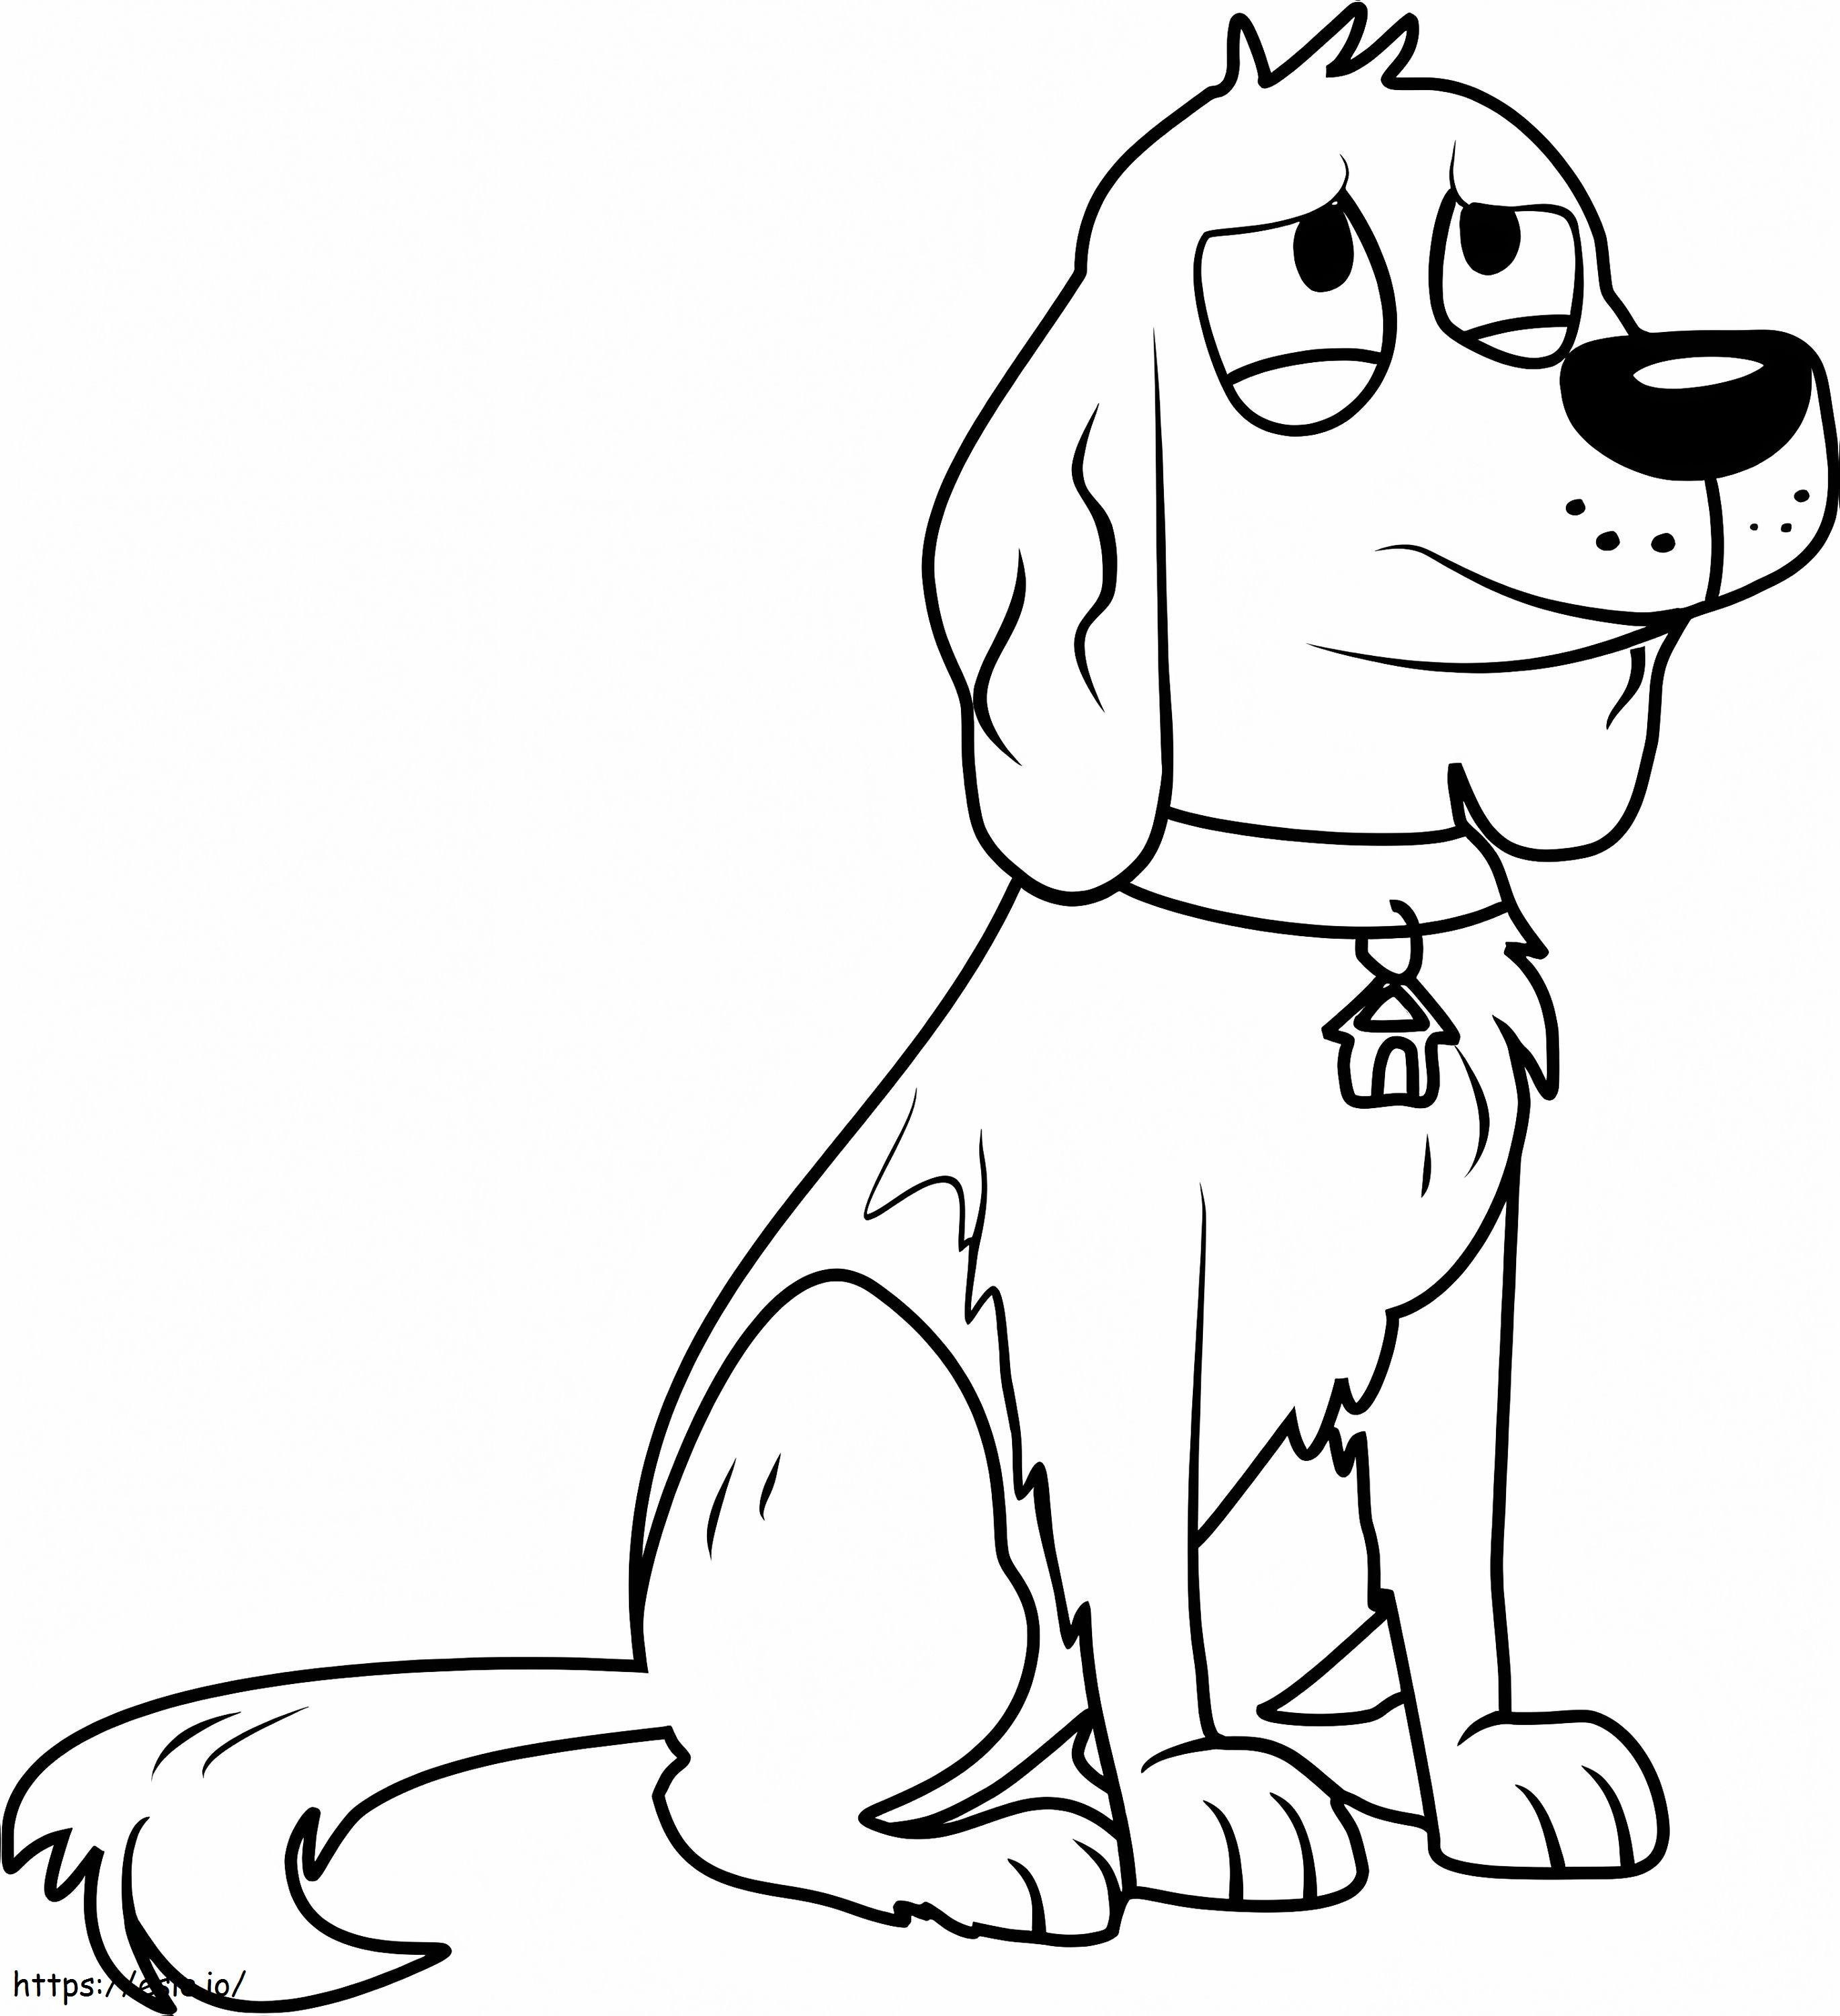 Ralph From Pound Puppies coloring page